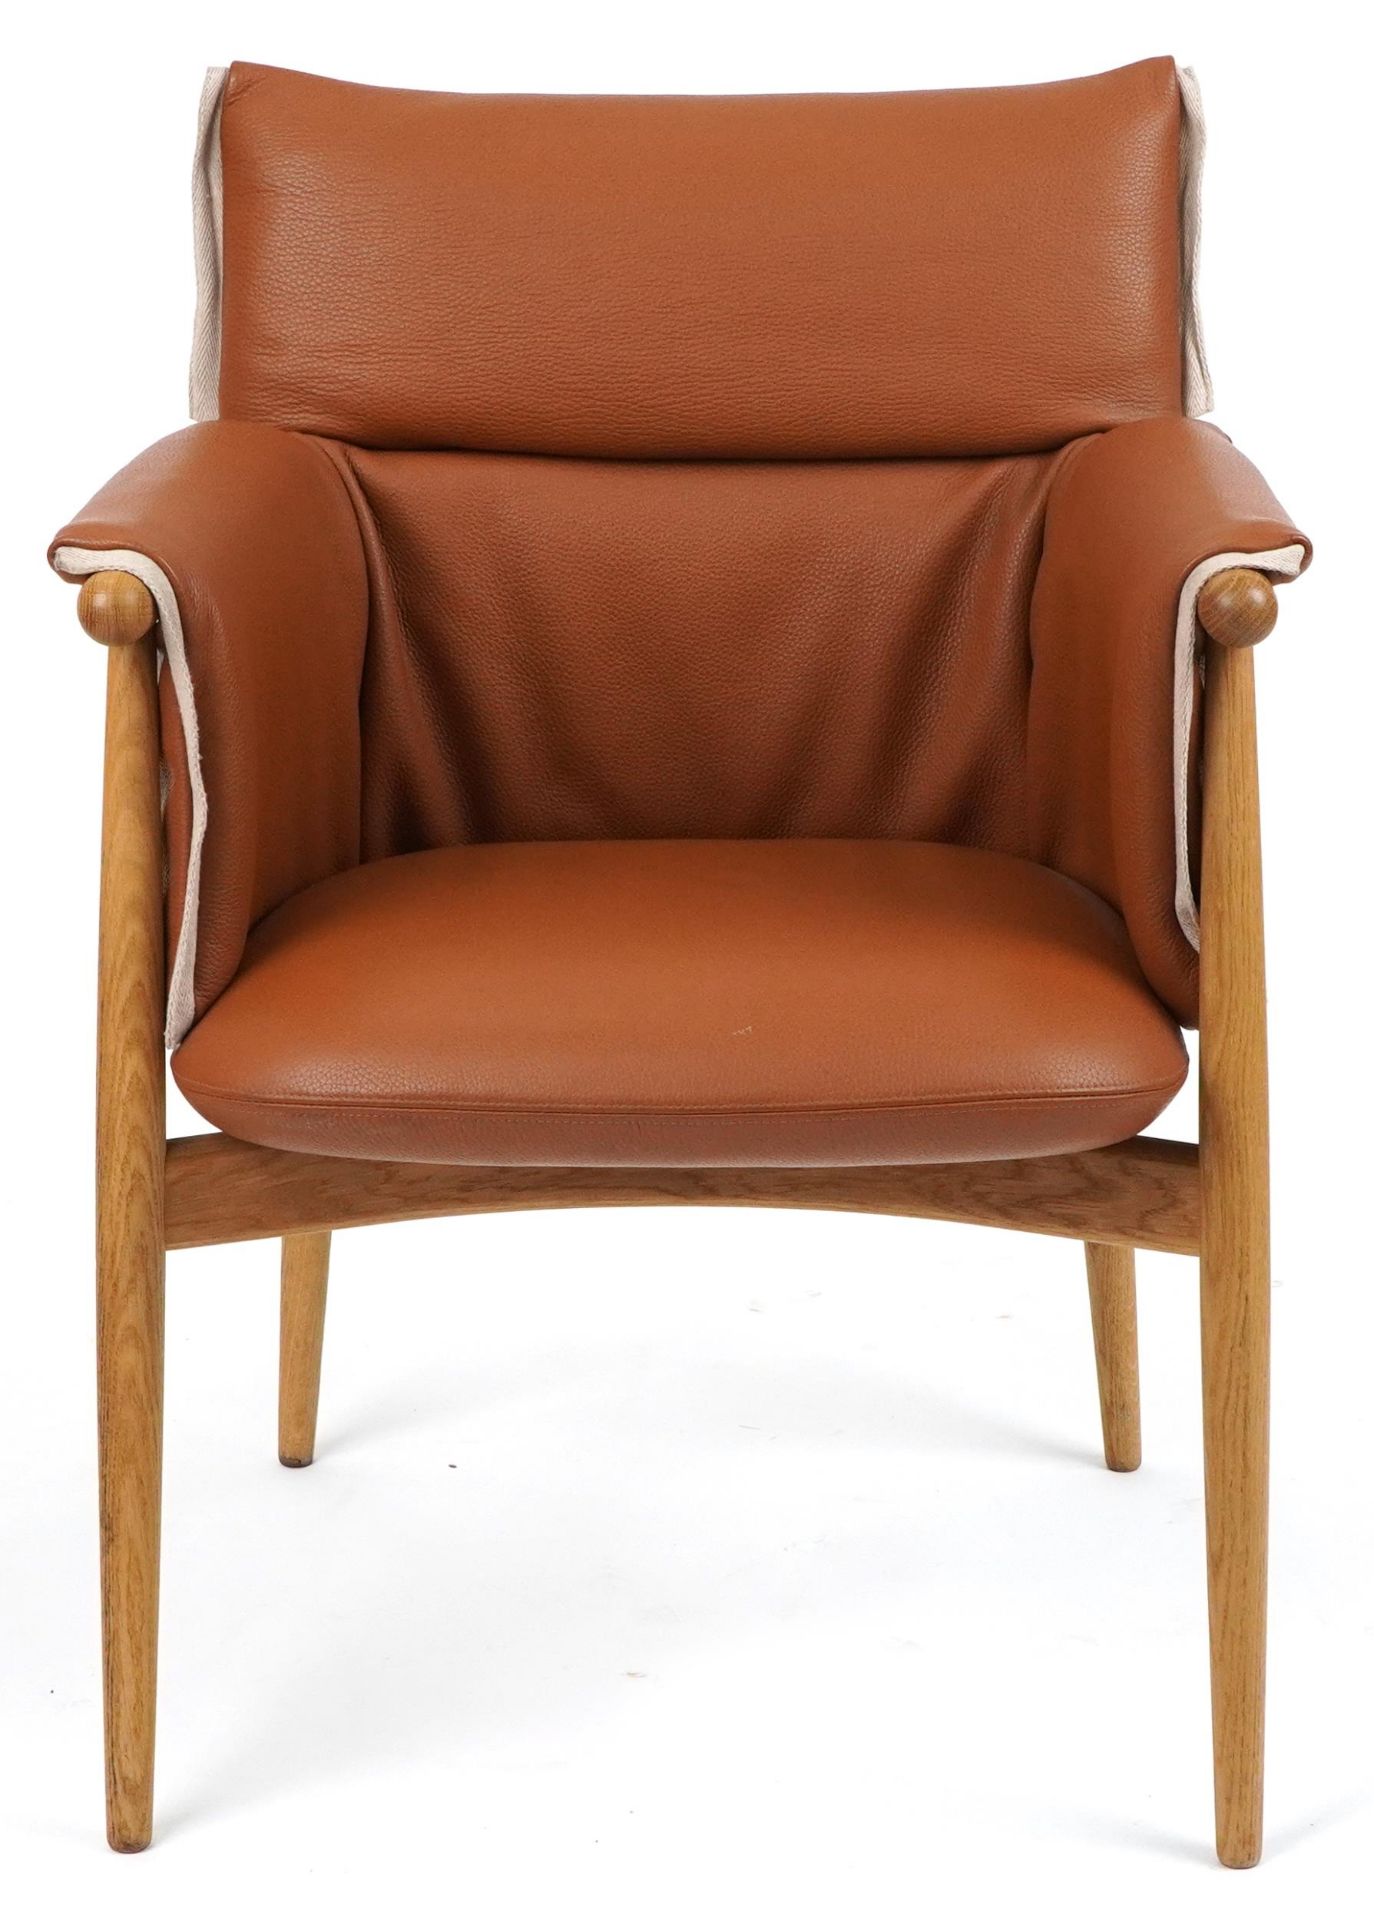 Carl Hansen & Son, Danish lightwood and brown leather upholstery embrace armchair, plaque to the - Image 2 of 5